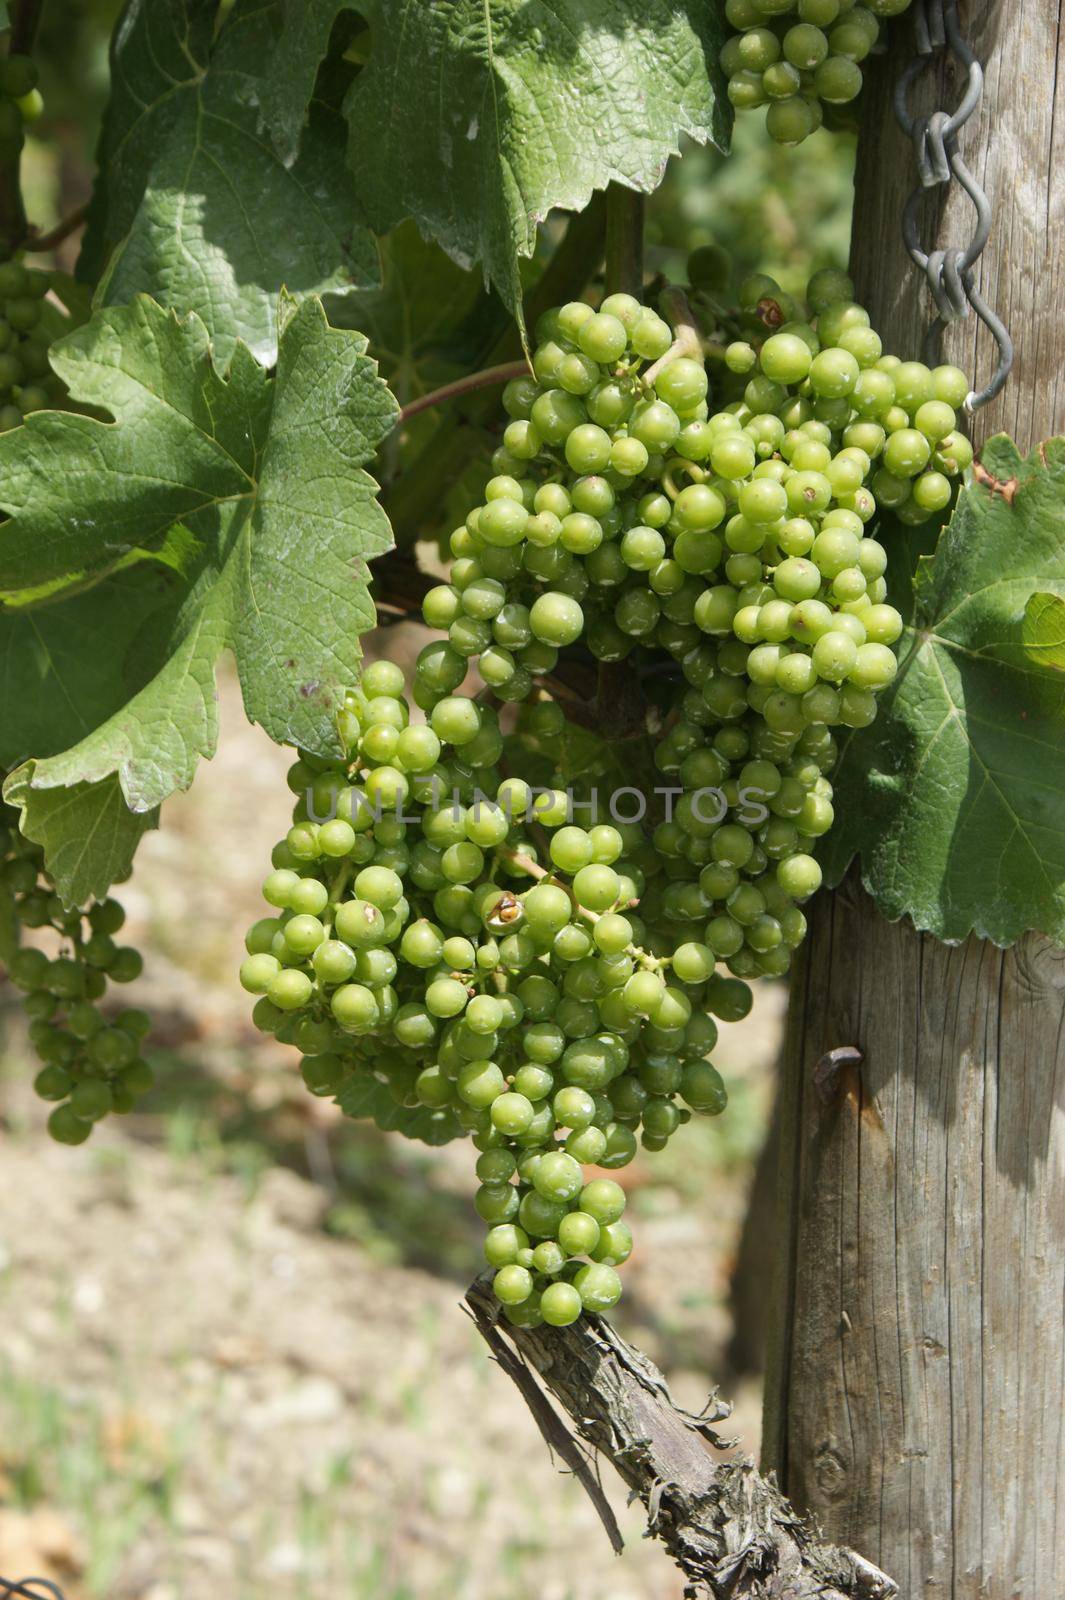 Unripe grapes in july on a hot summer day. A european blue grape variety growing on a private garden vine, a sunny day